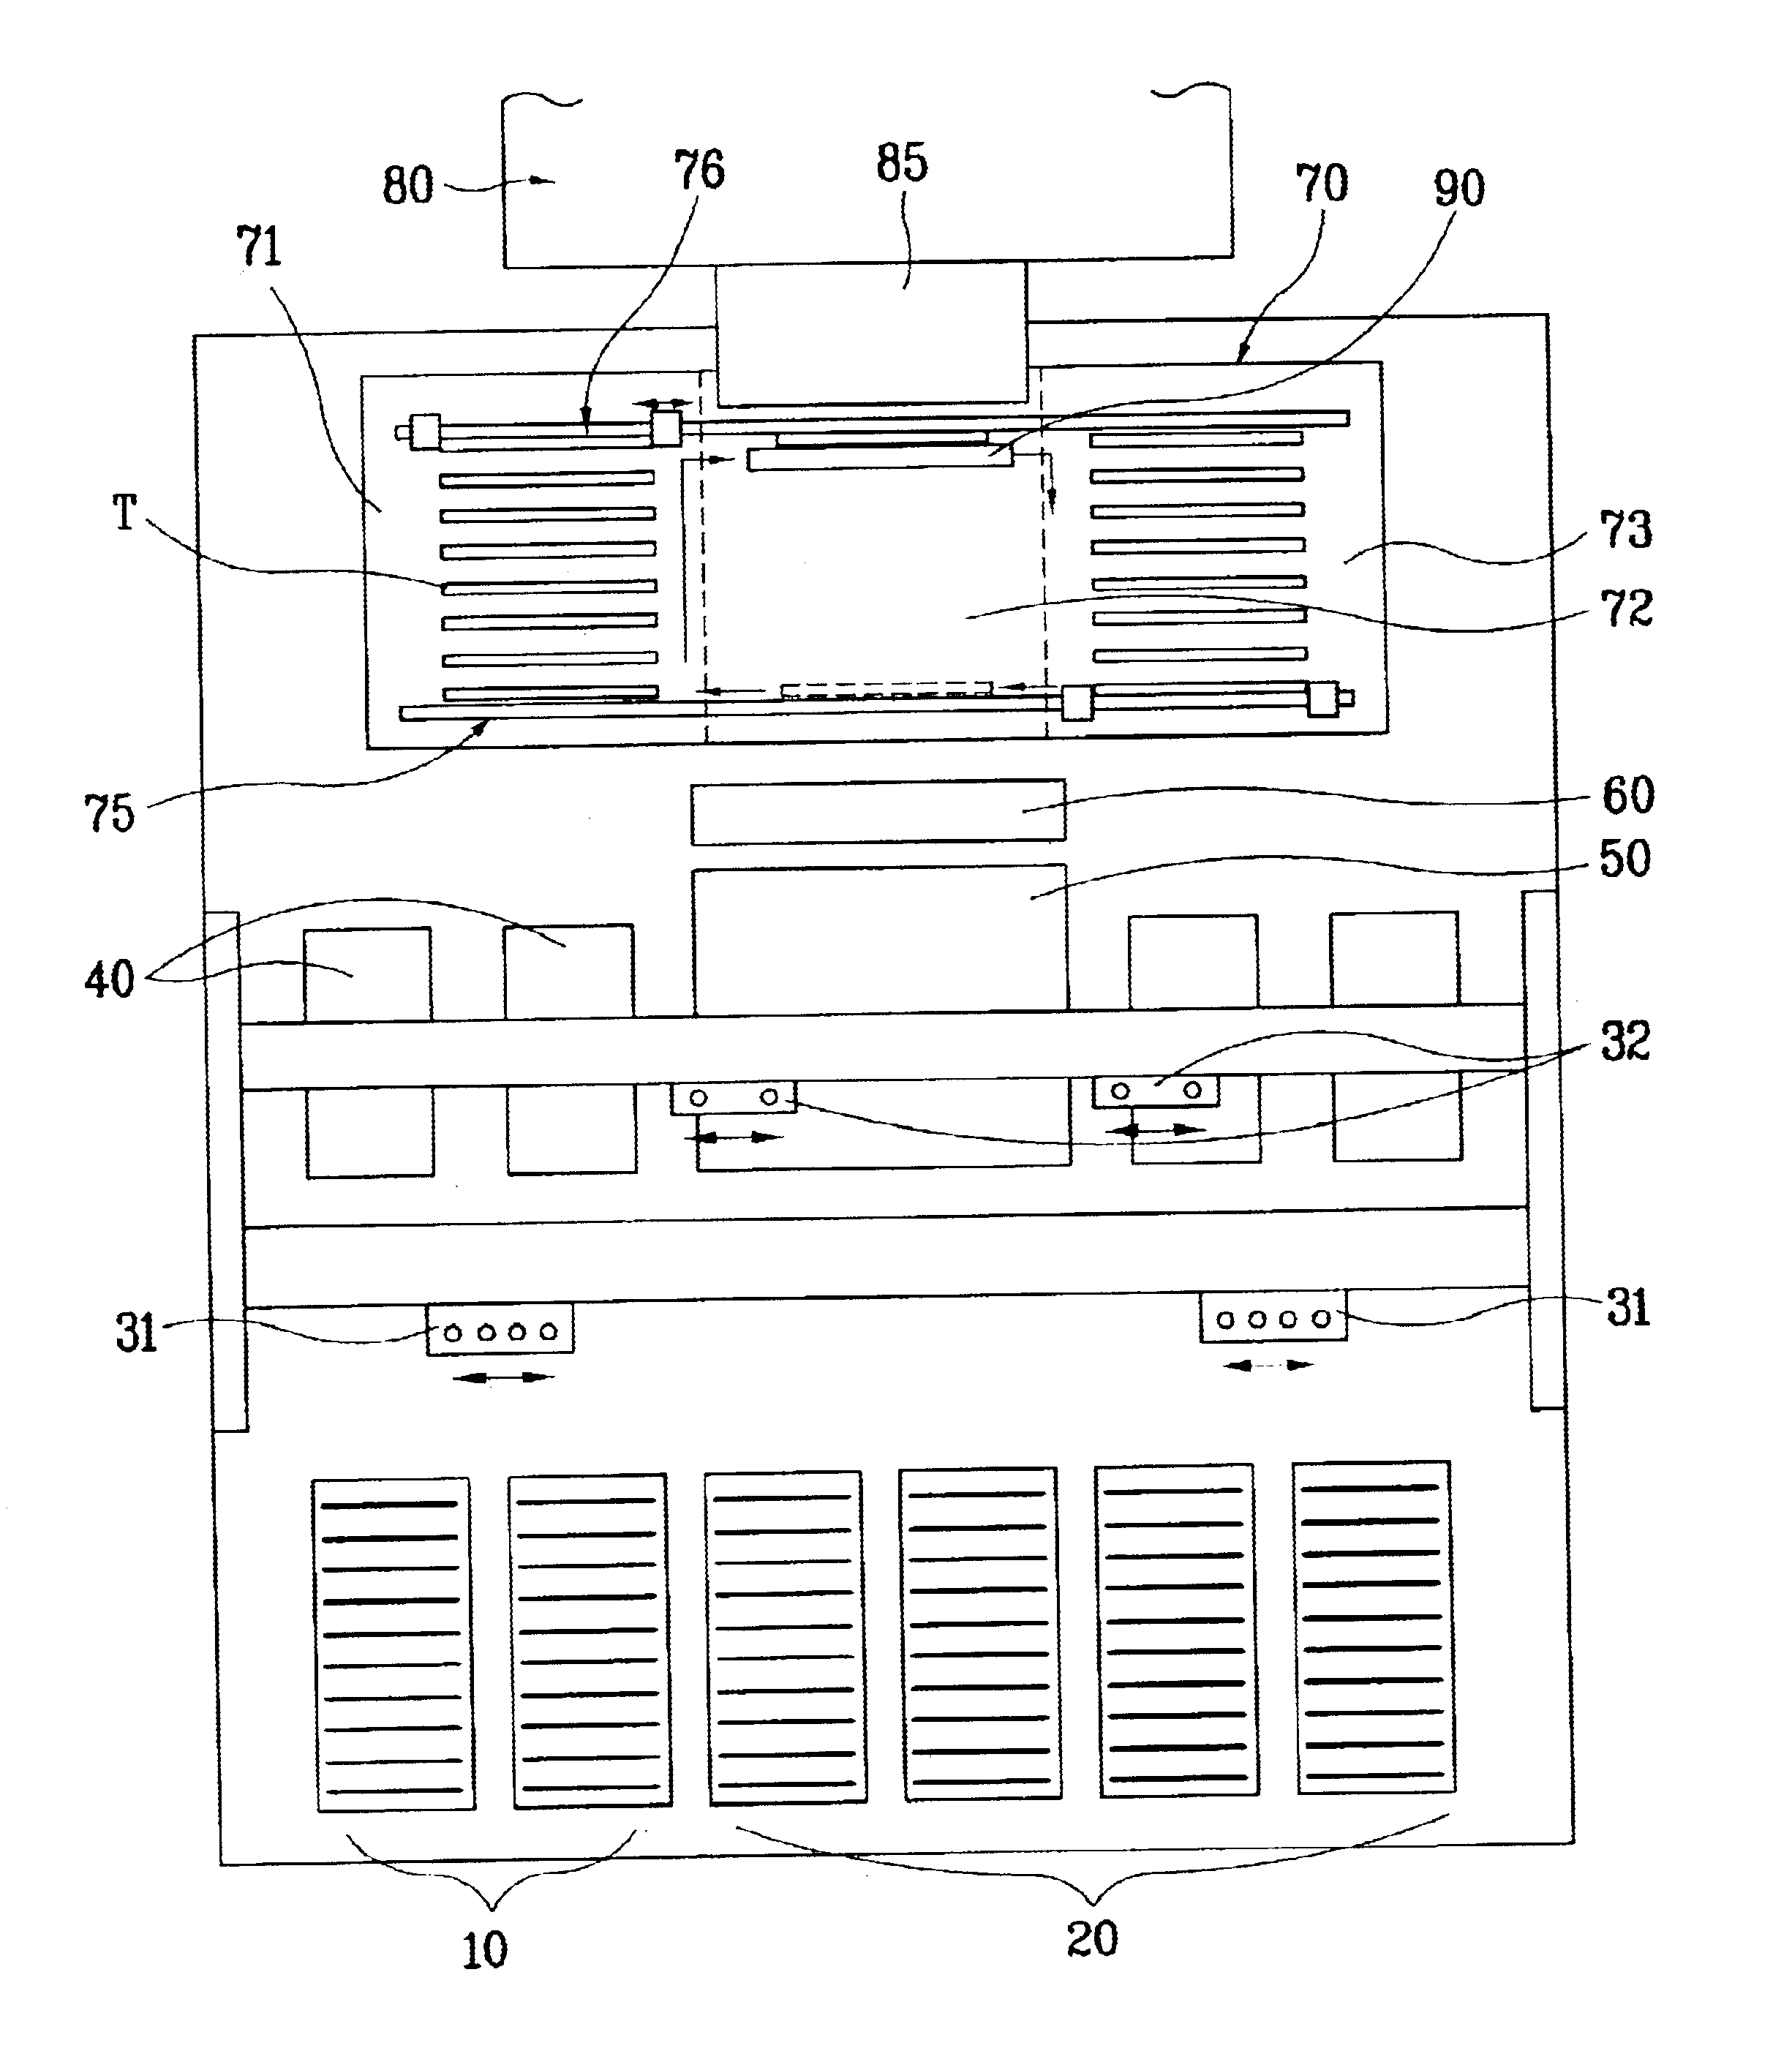 Device for compensating for a test temperature deviation in a semiconductor device handler